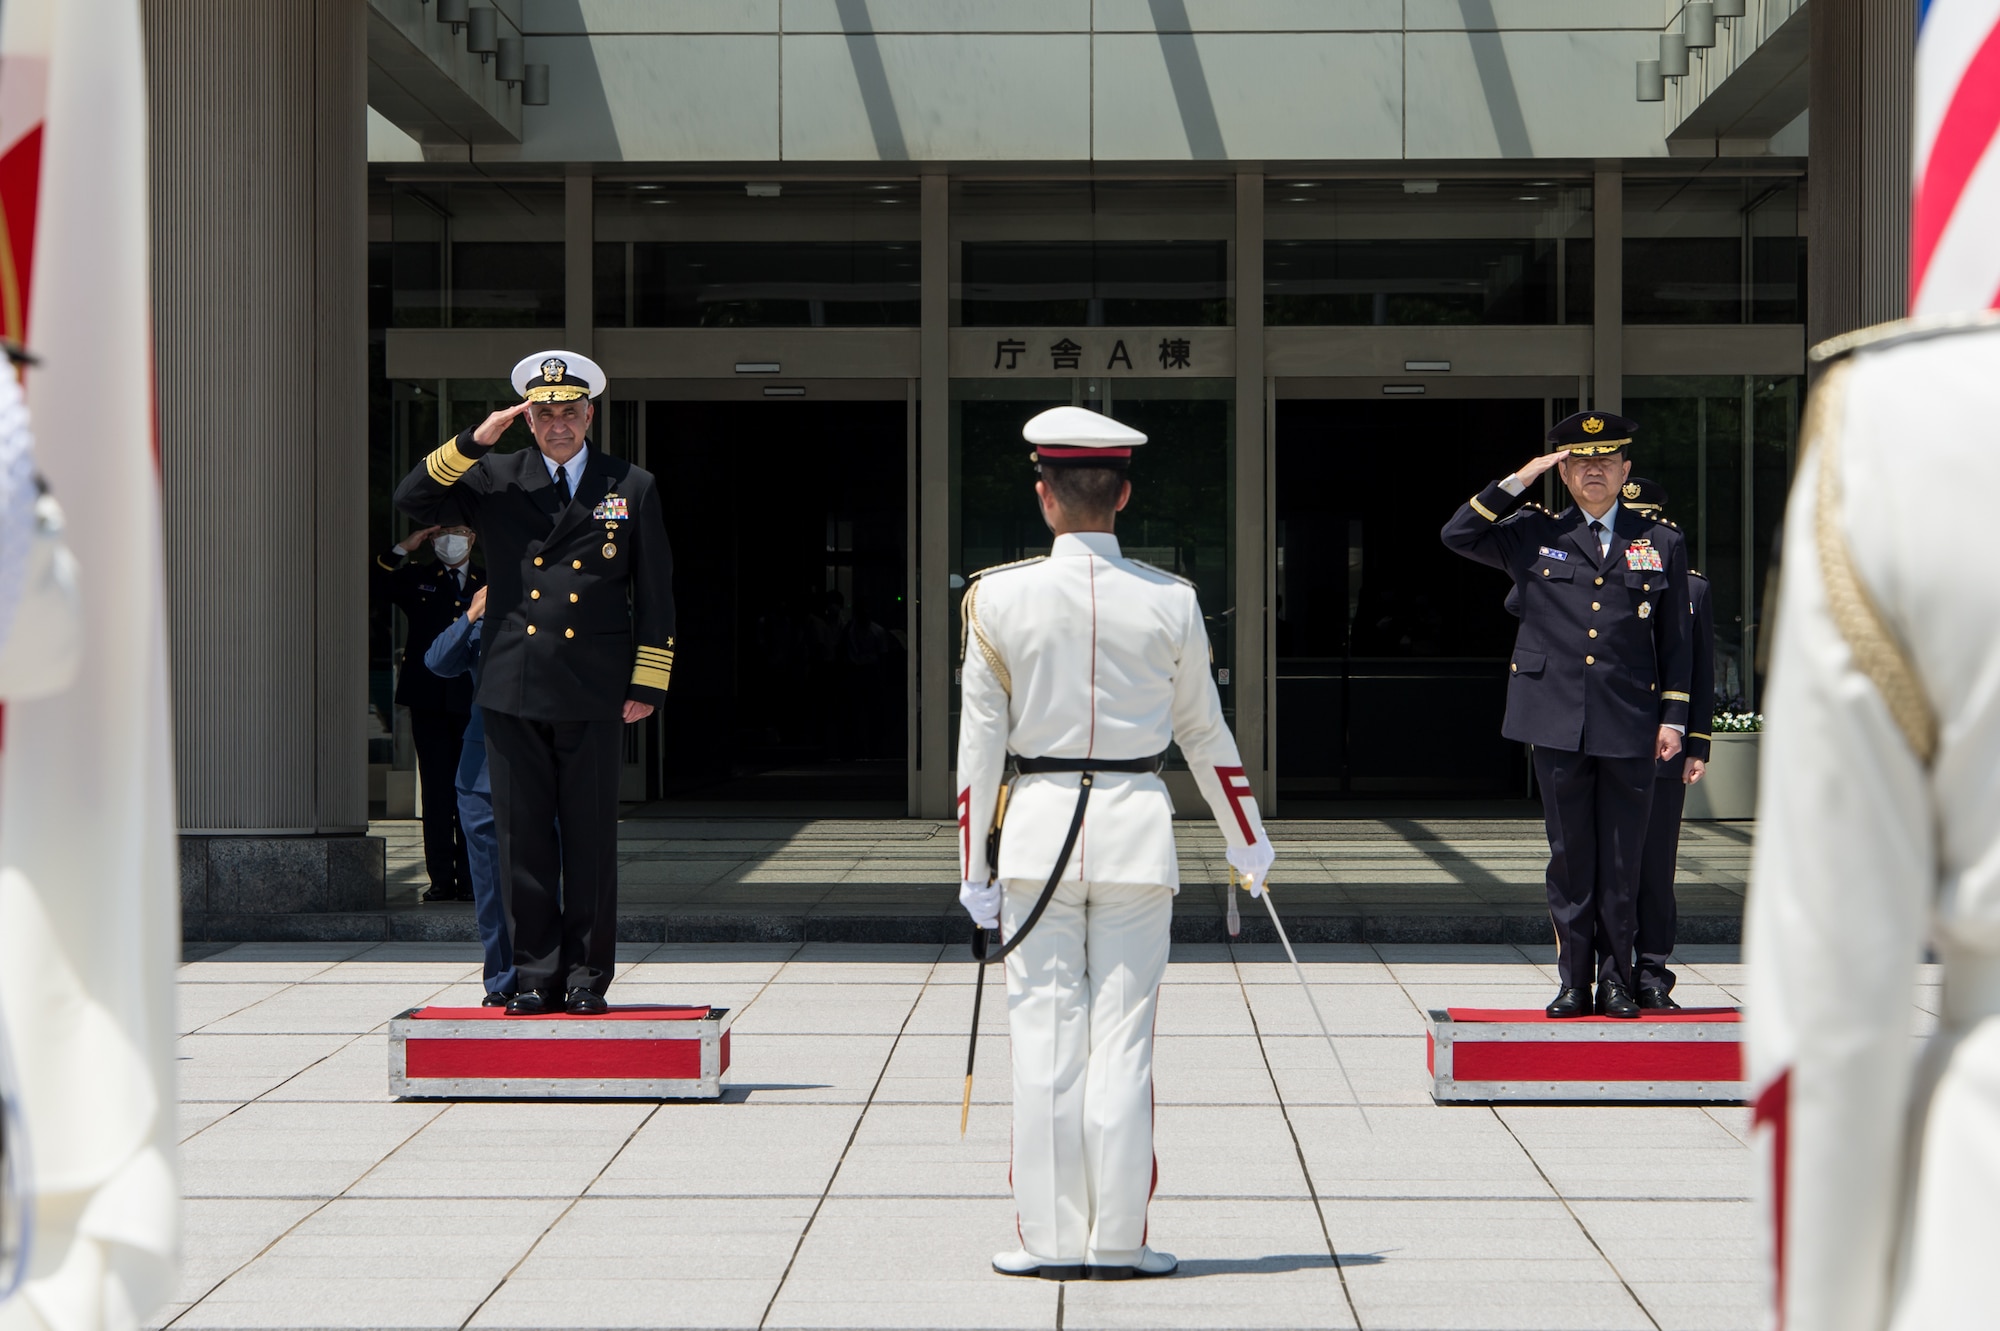 While in Japan, Richard meets with the Japanese Chairman of the Joint Chiefs of Staff, Japanese Joint Staff, Defense Minister, Foreign Minister and Secretary General. During these visits, he discussed with Japanese senior leaders regional situational awareness of threats and areas where the two nations can strengthen strategic deterrence.